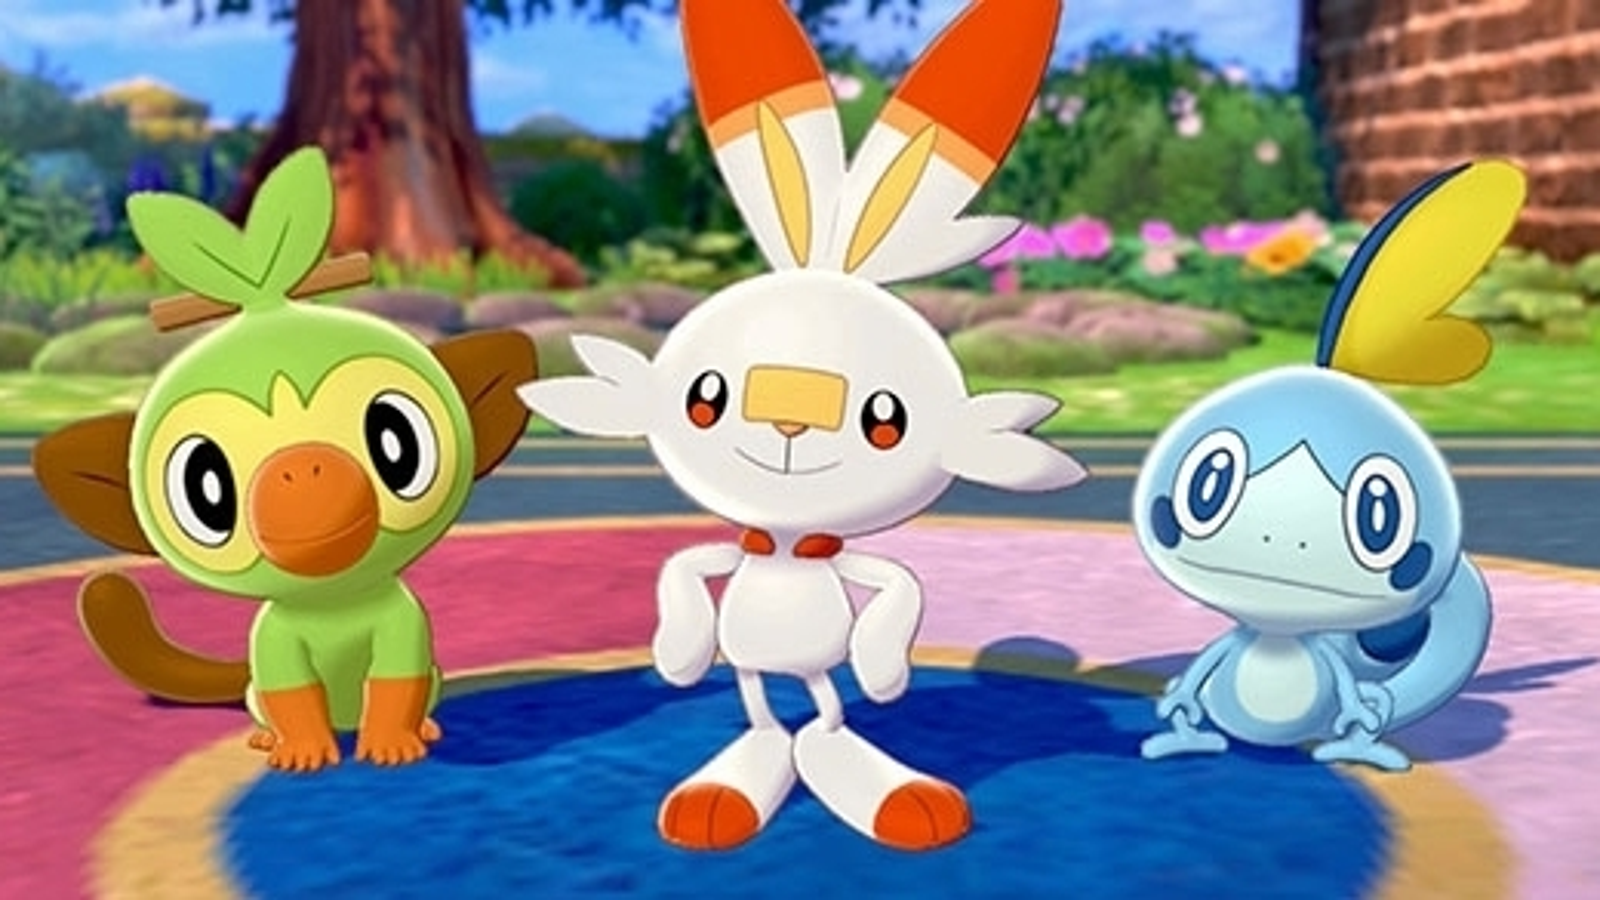 Pokemon Sword and Shield Starters Evolution Guide - Which Starter